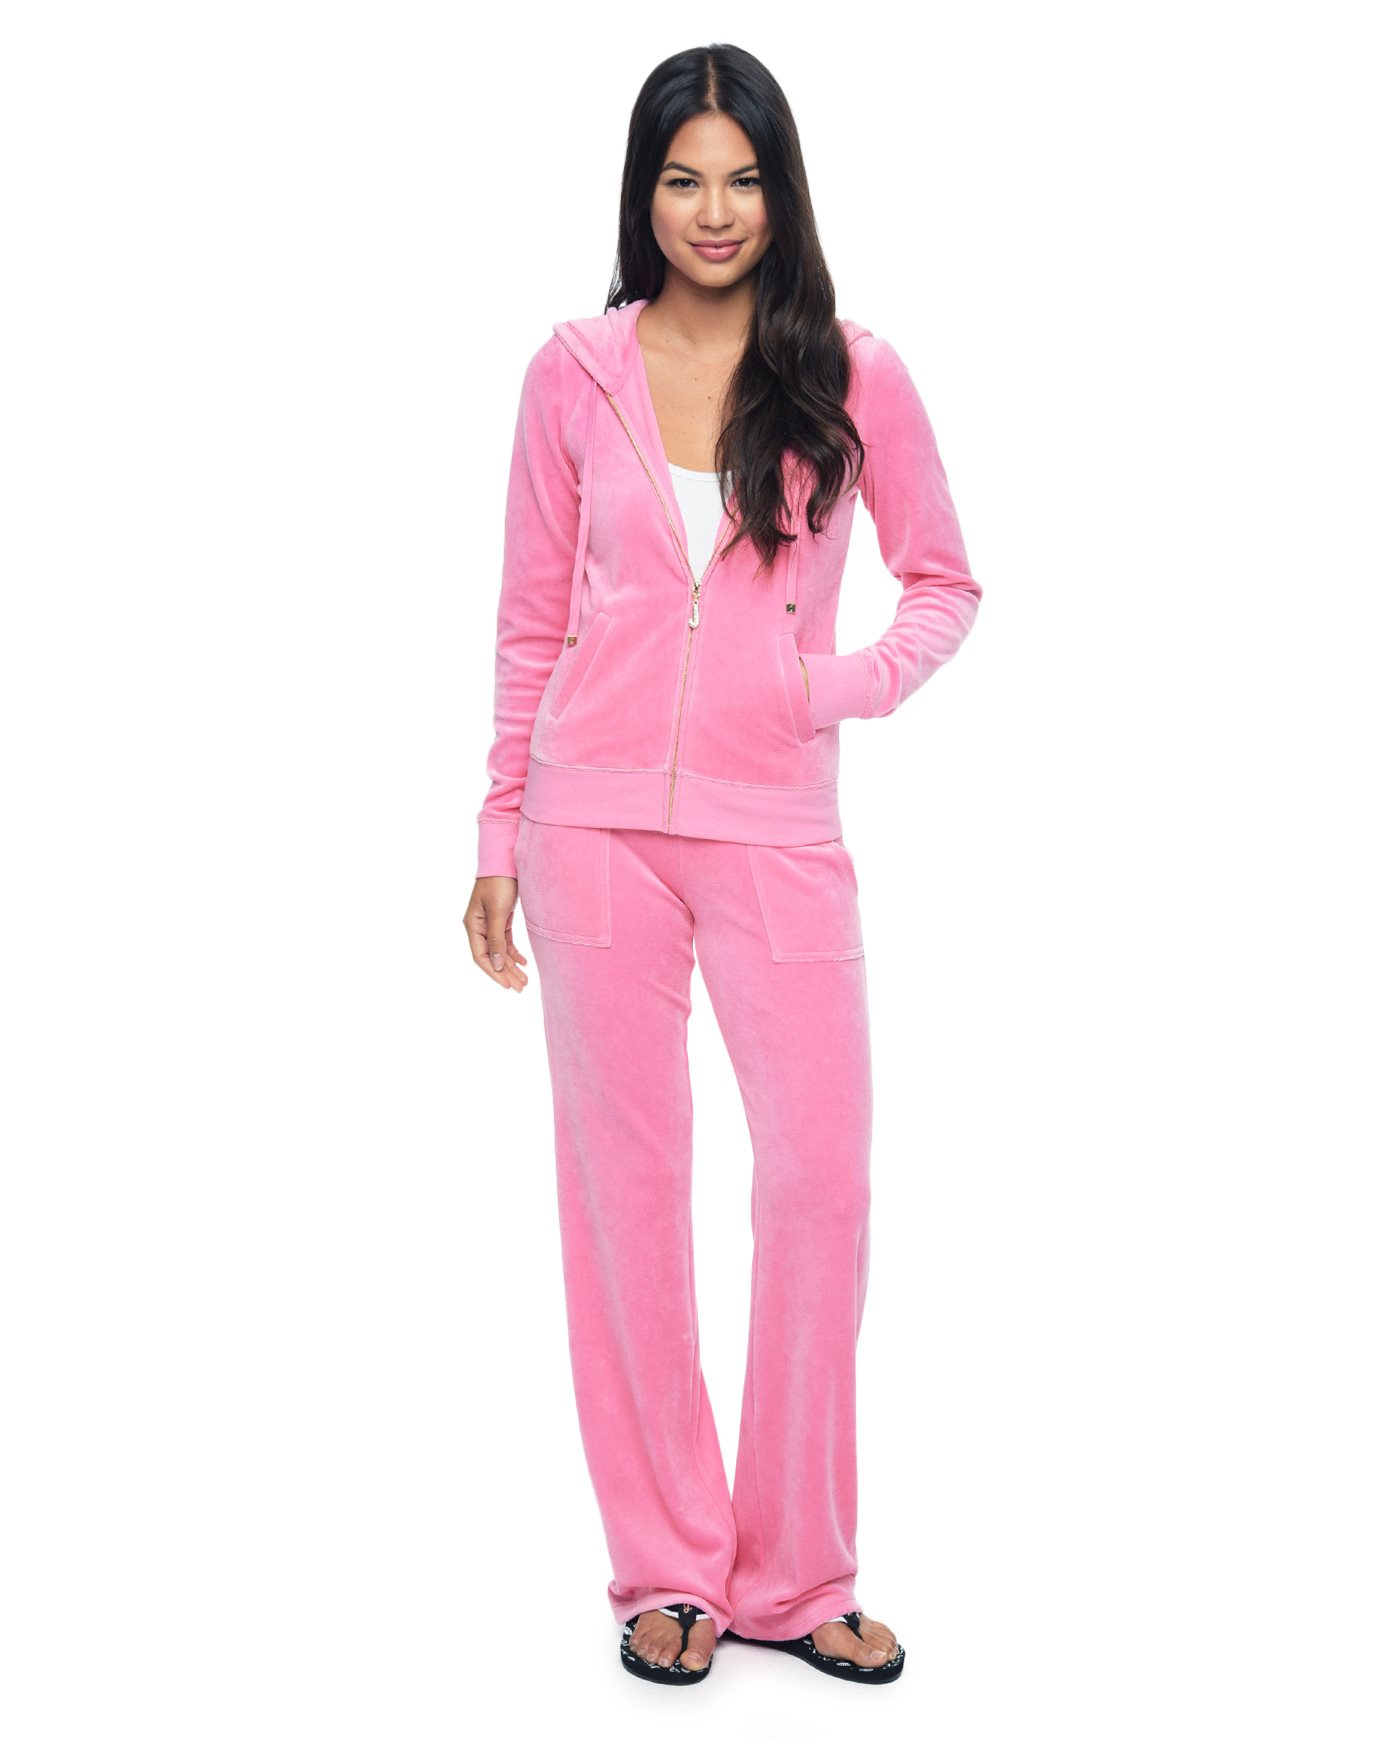 Juicy couture J Bling Robertson Original Velour Jacket in Pink | Lyst